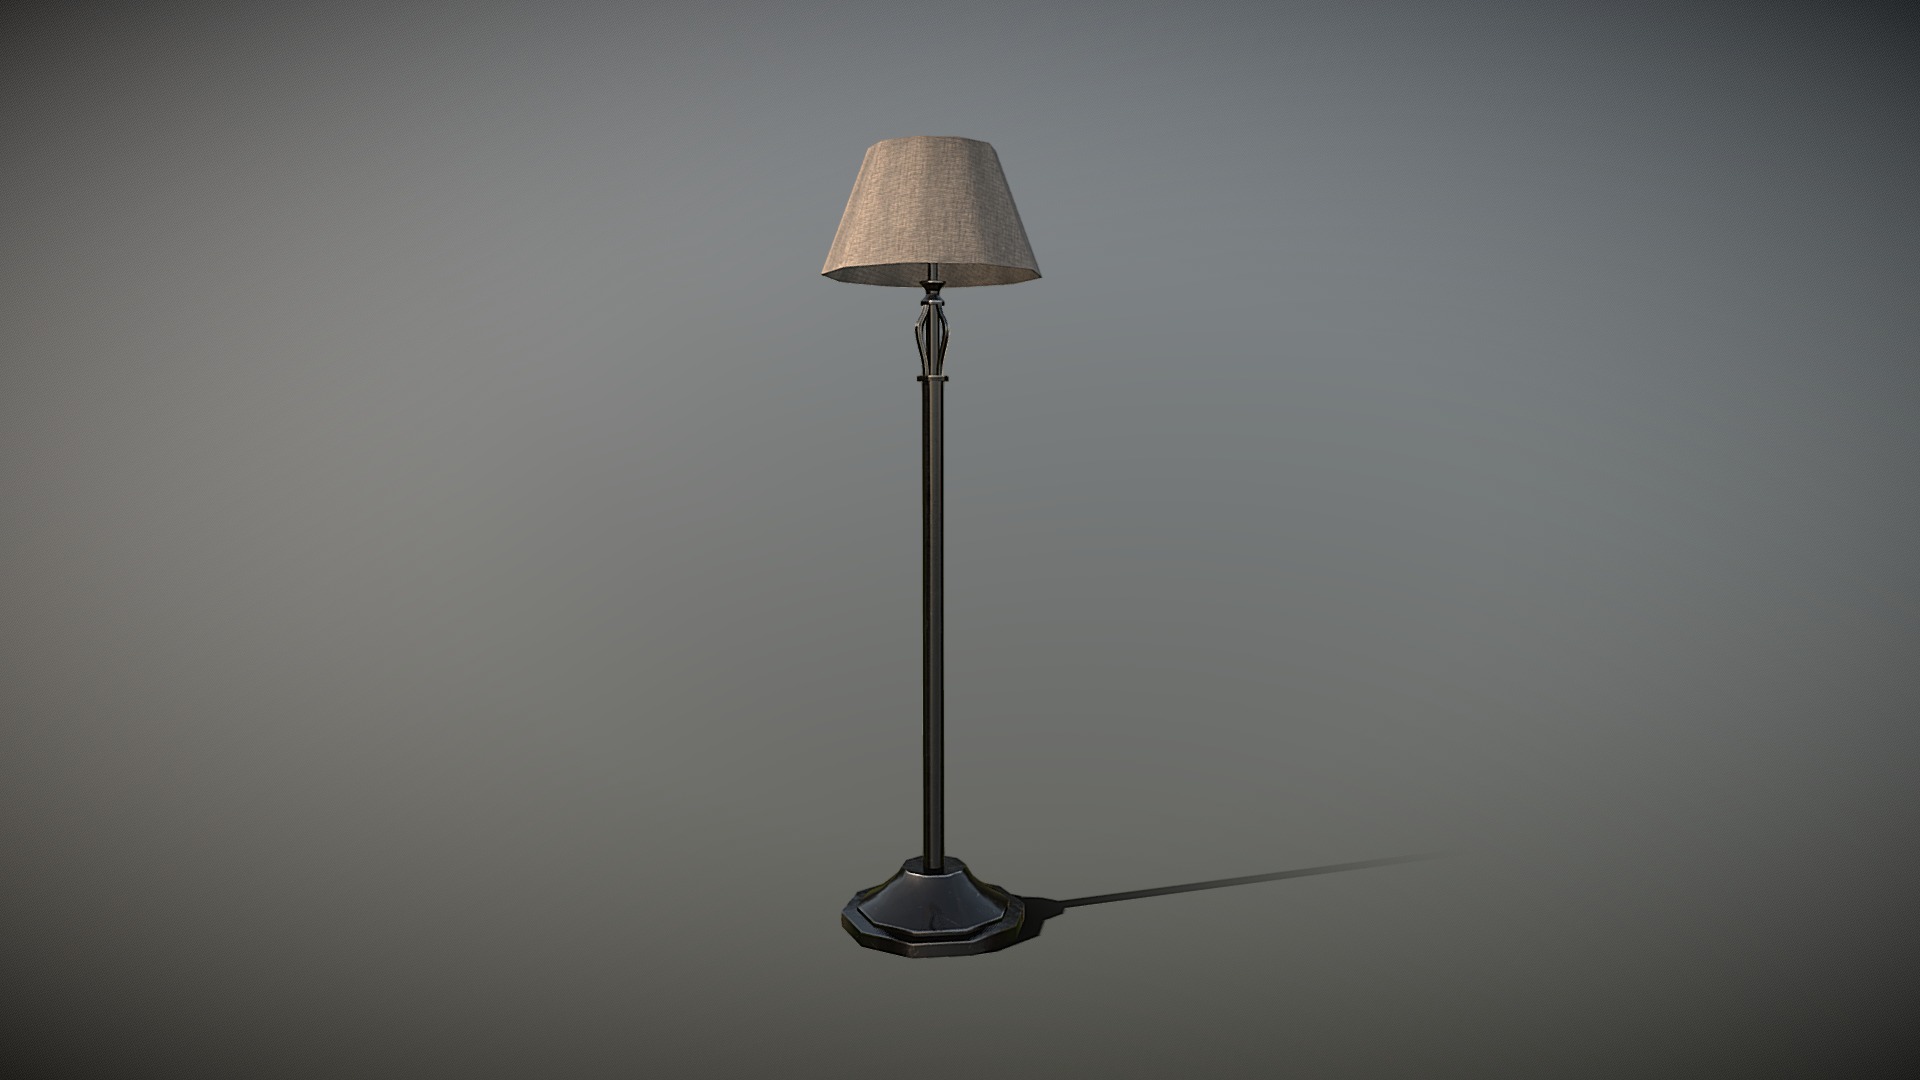 3D model Lamp – Low Poly - This is a 3D model of the Lamp - Low Poly. The 3D model is about a lamp on a table.